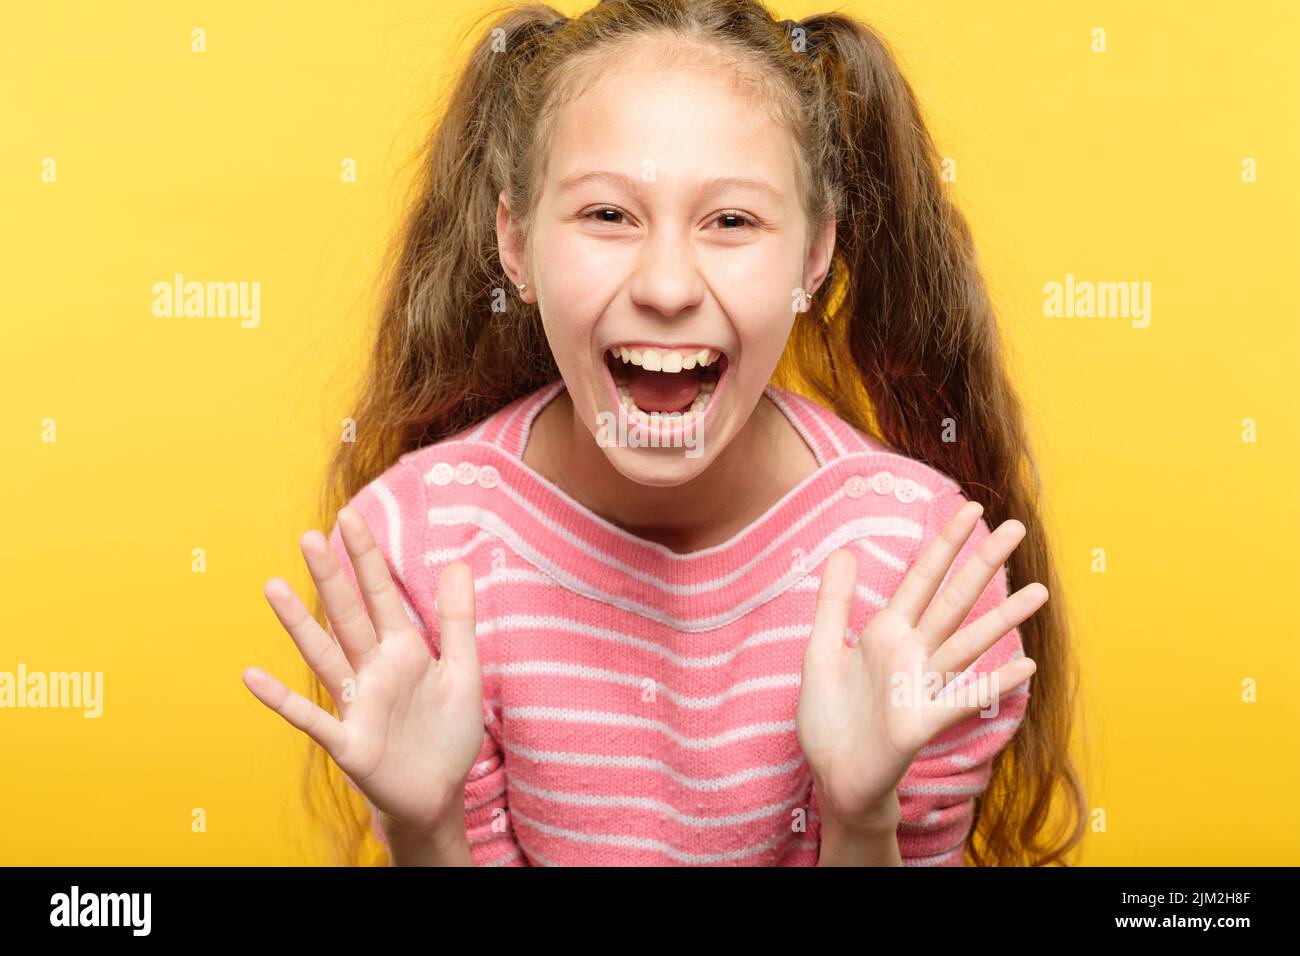 overexcited enthusiastic laughing girl portrait Stock Photo